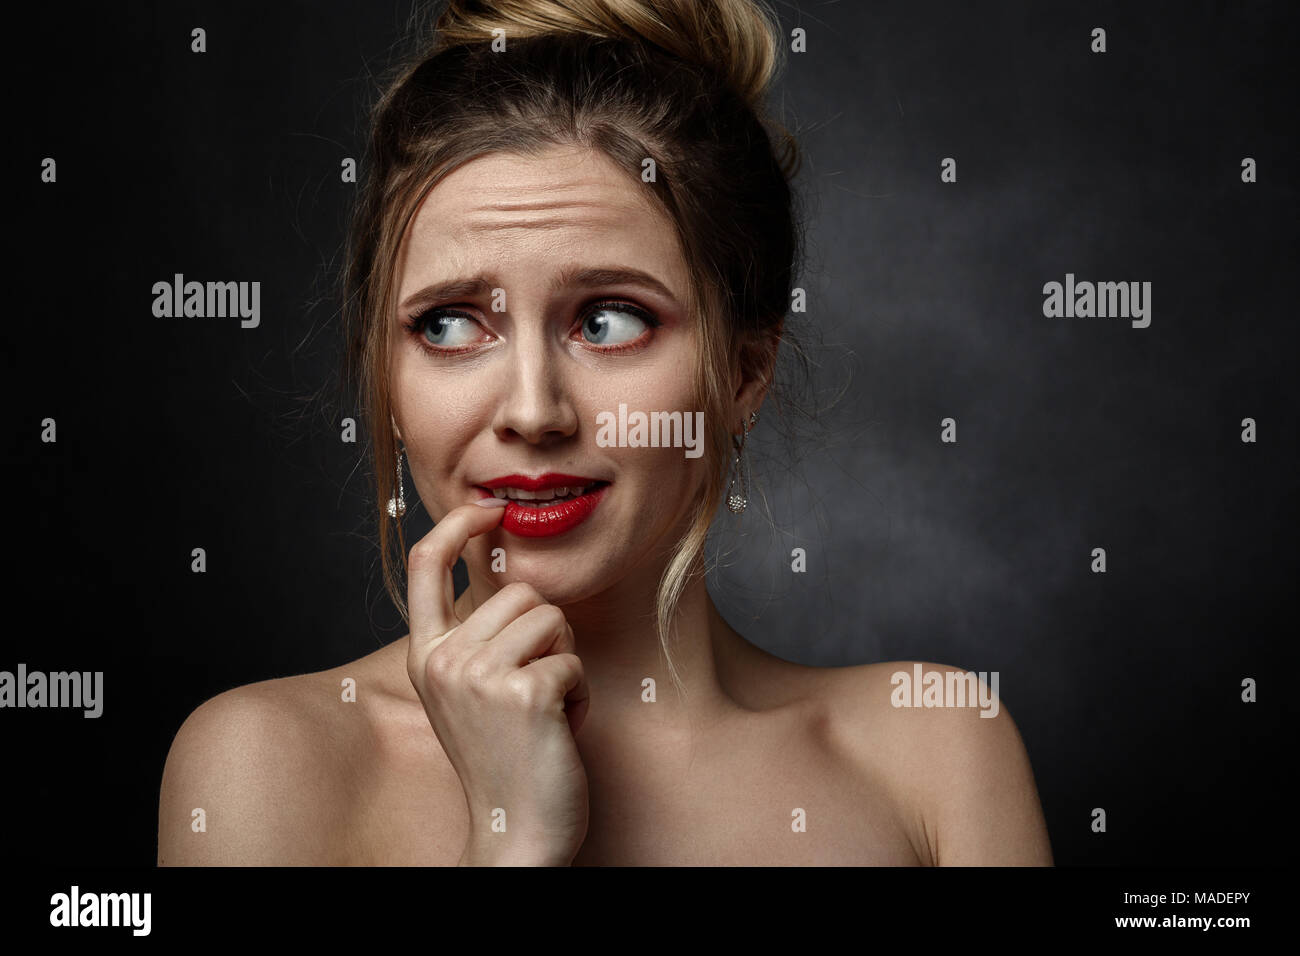 stressed fun girl with finger on mouth on black background looking aside Stock Photo